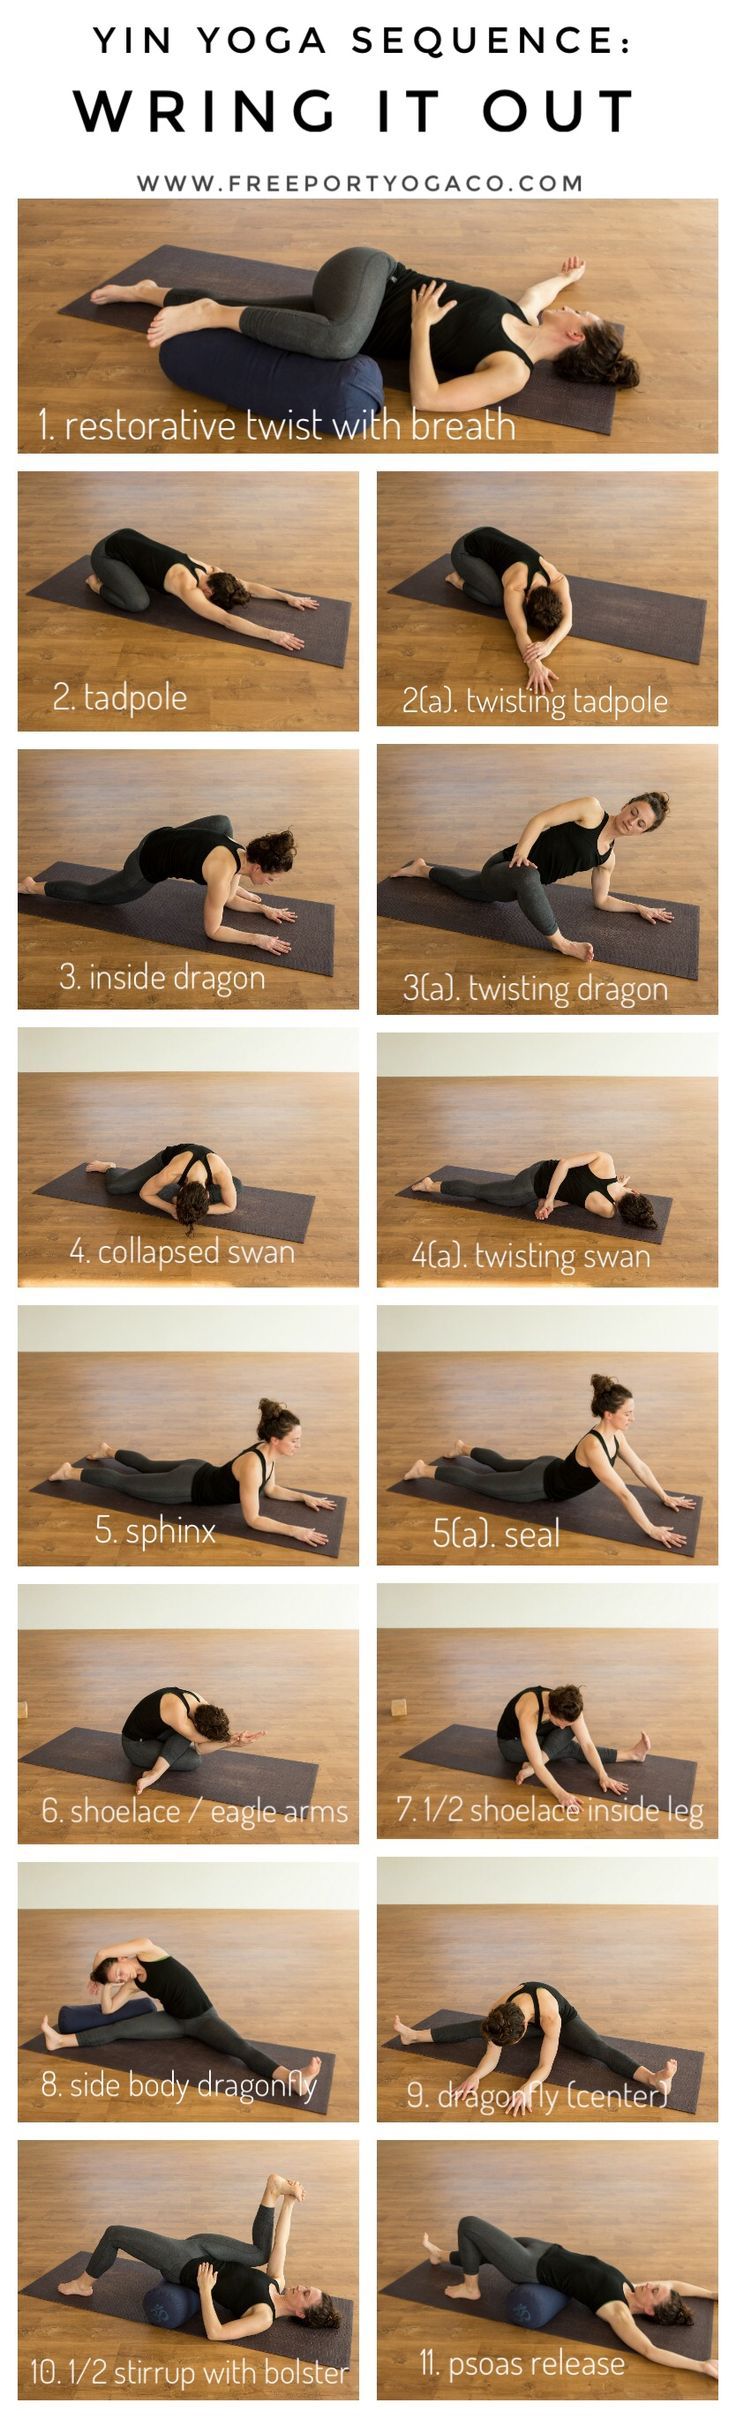 A spinal twist can serve as a sigh of relief for your entire being. A reset for ...